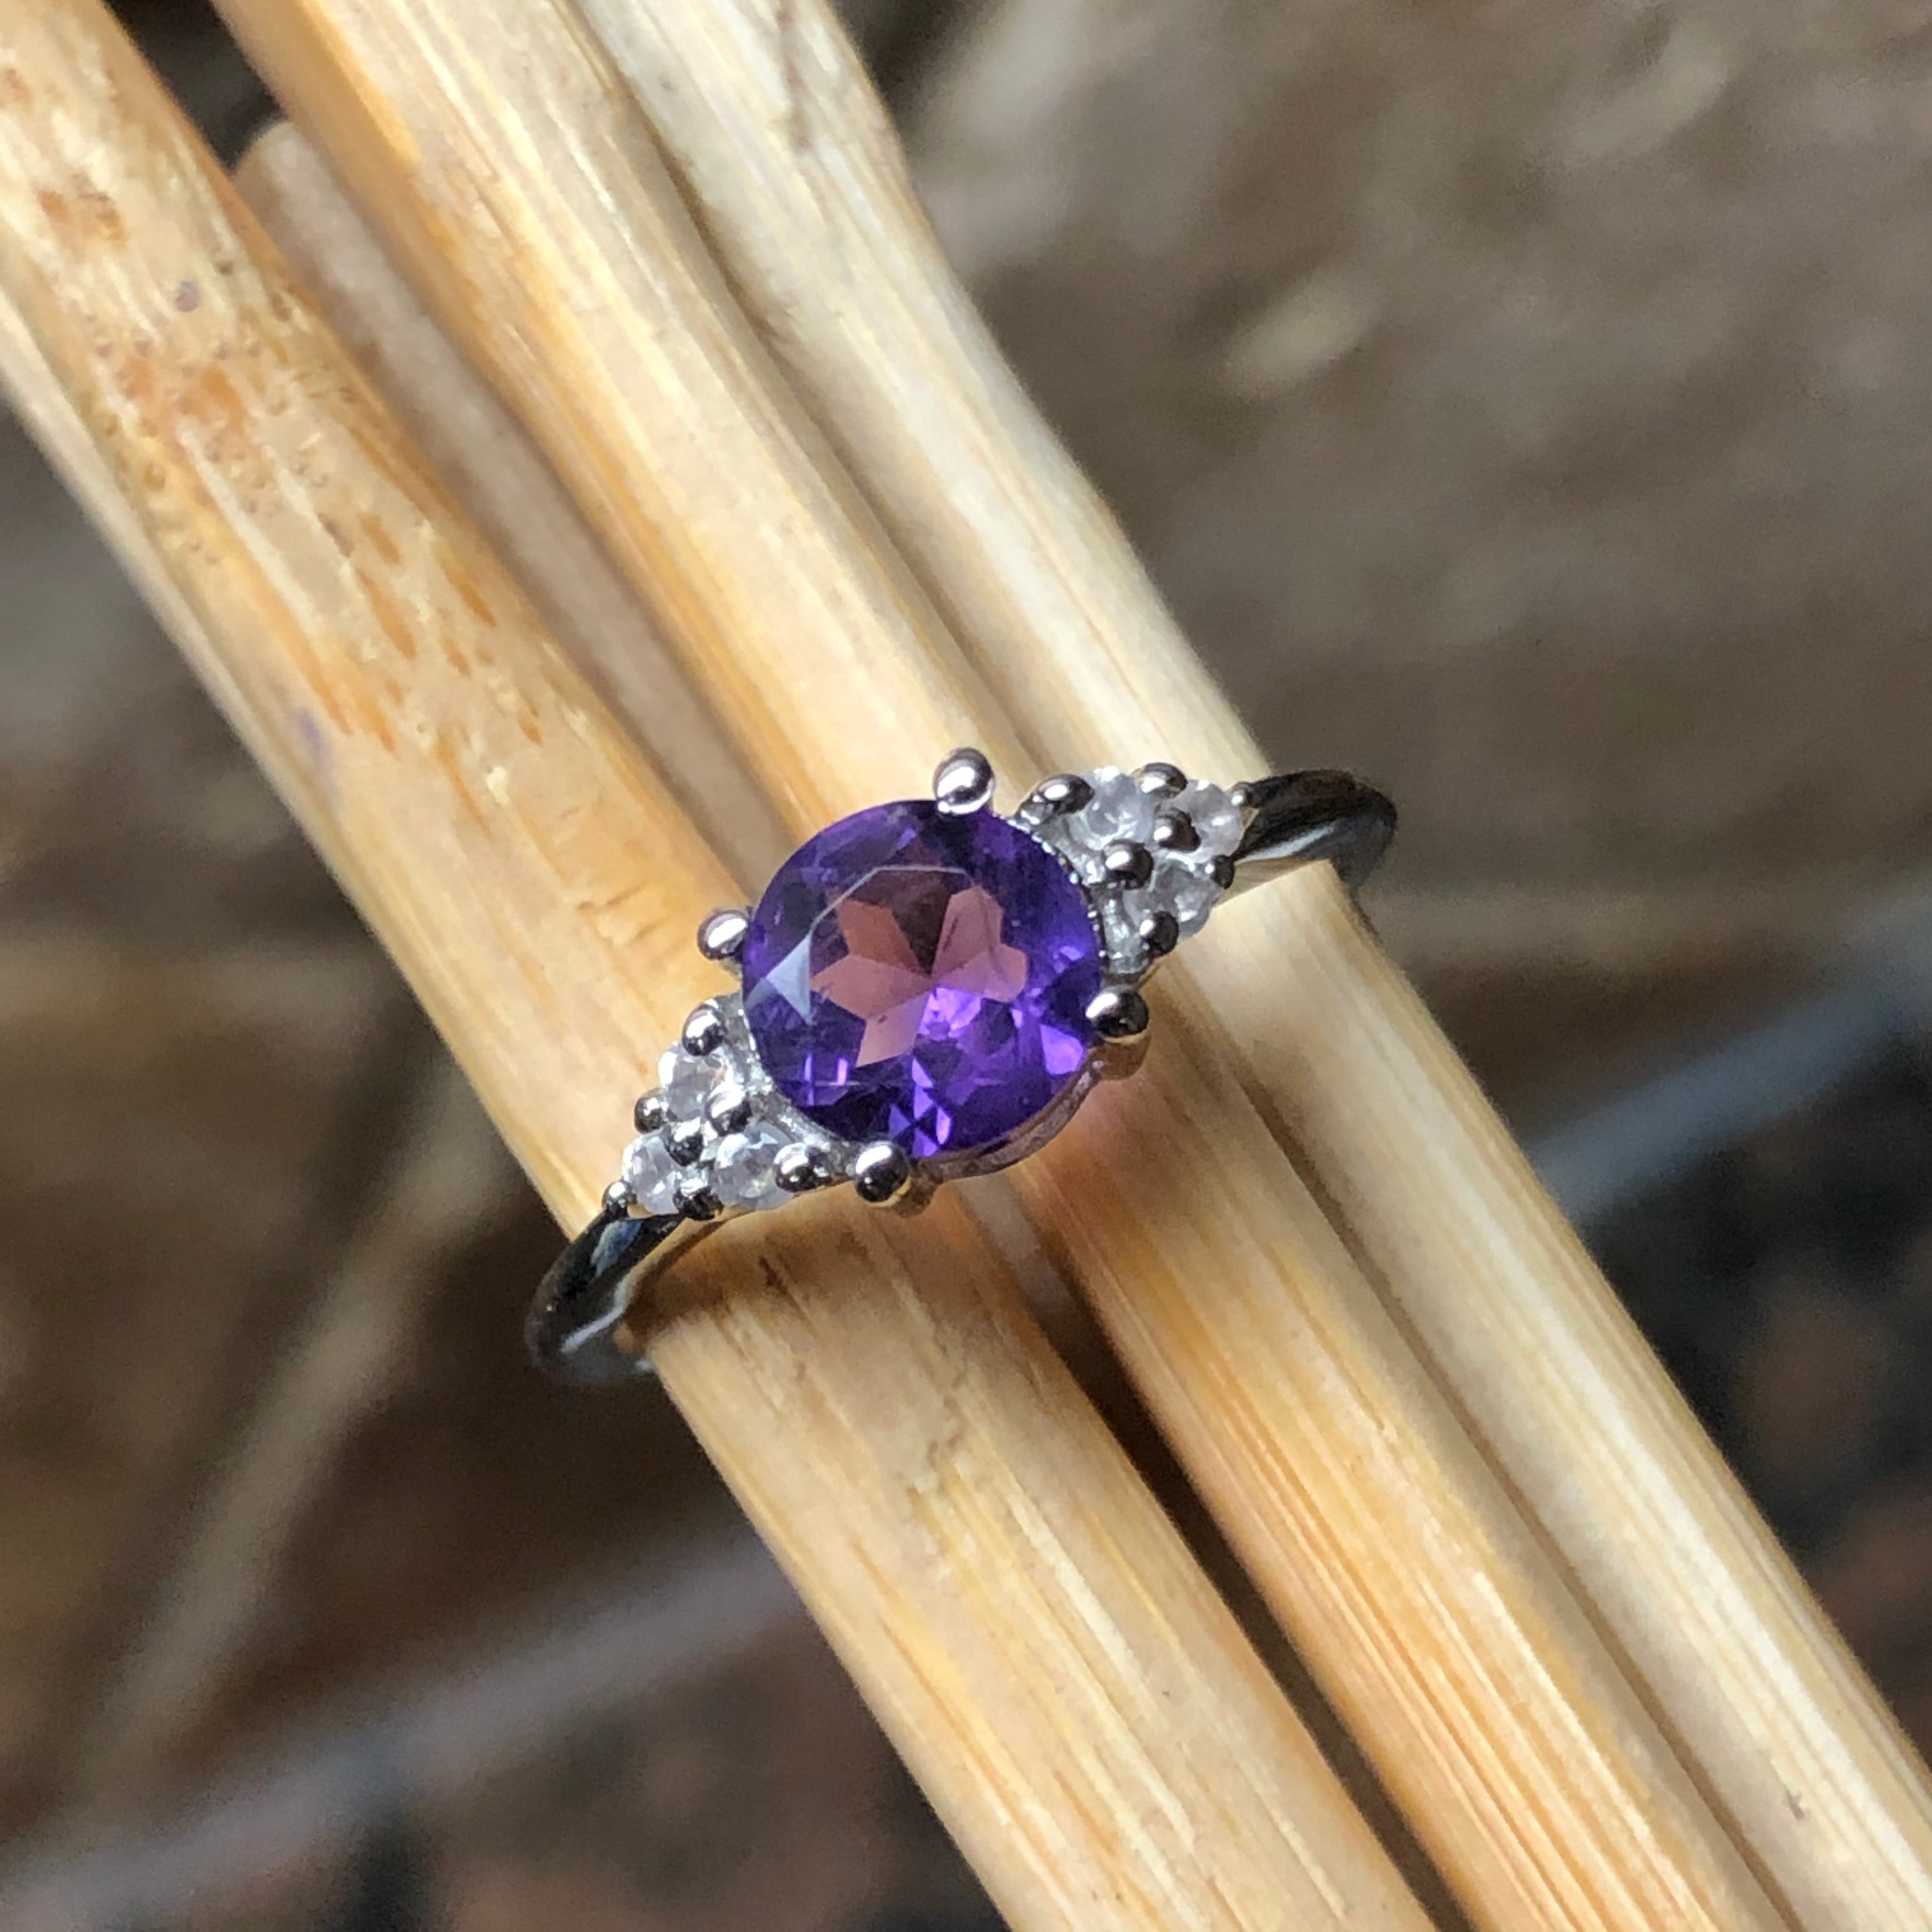 Natural 1ct Purple Amethyst, White Topaz 925 Solid Sterling Silver Engagement Ring Size 6, 7, 8, 9 - Natural Rocks by Kala